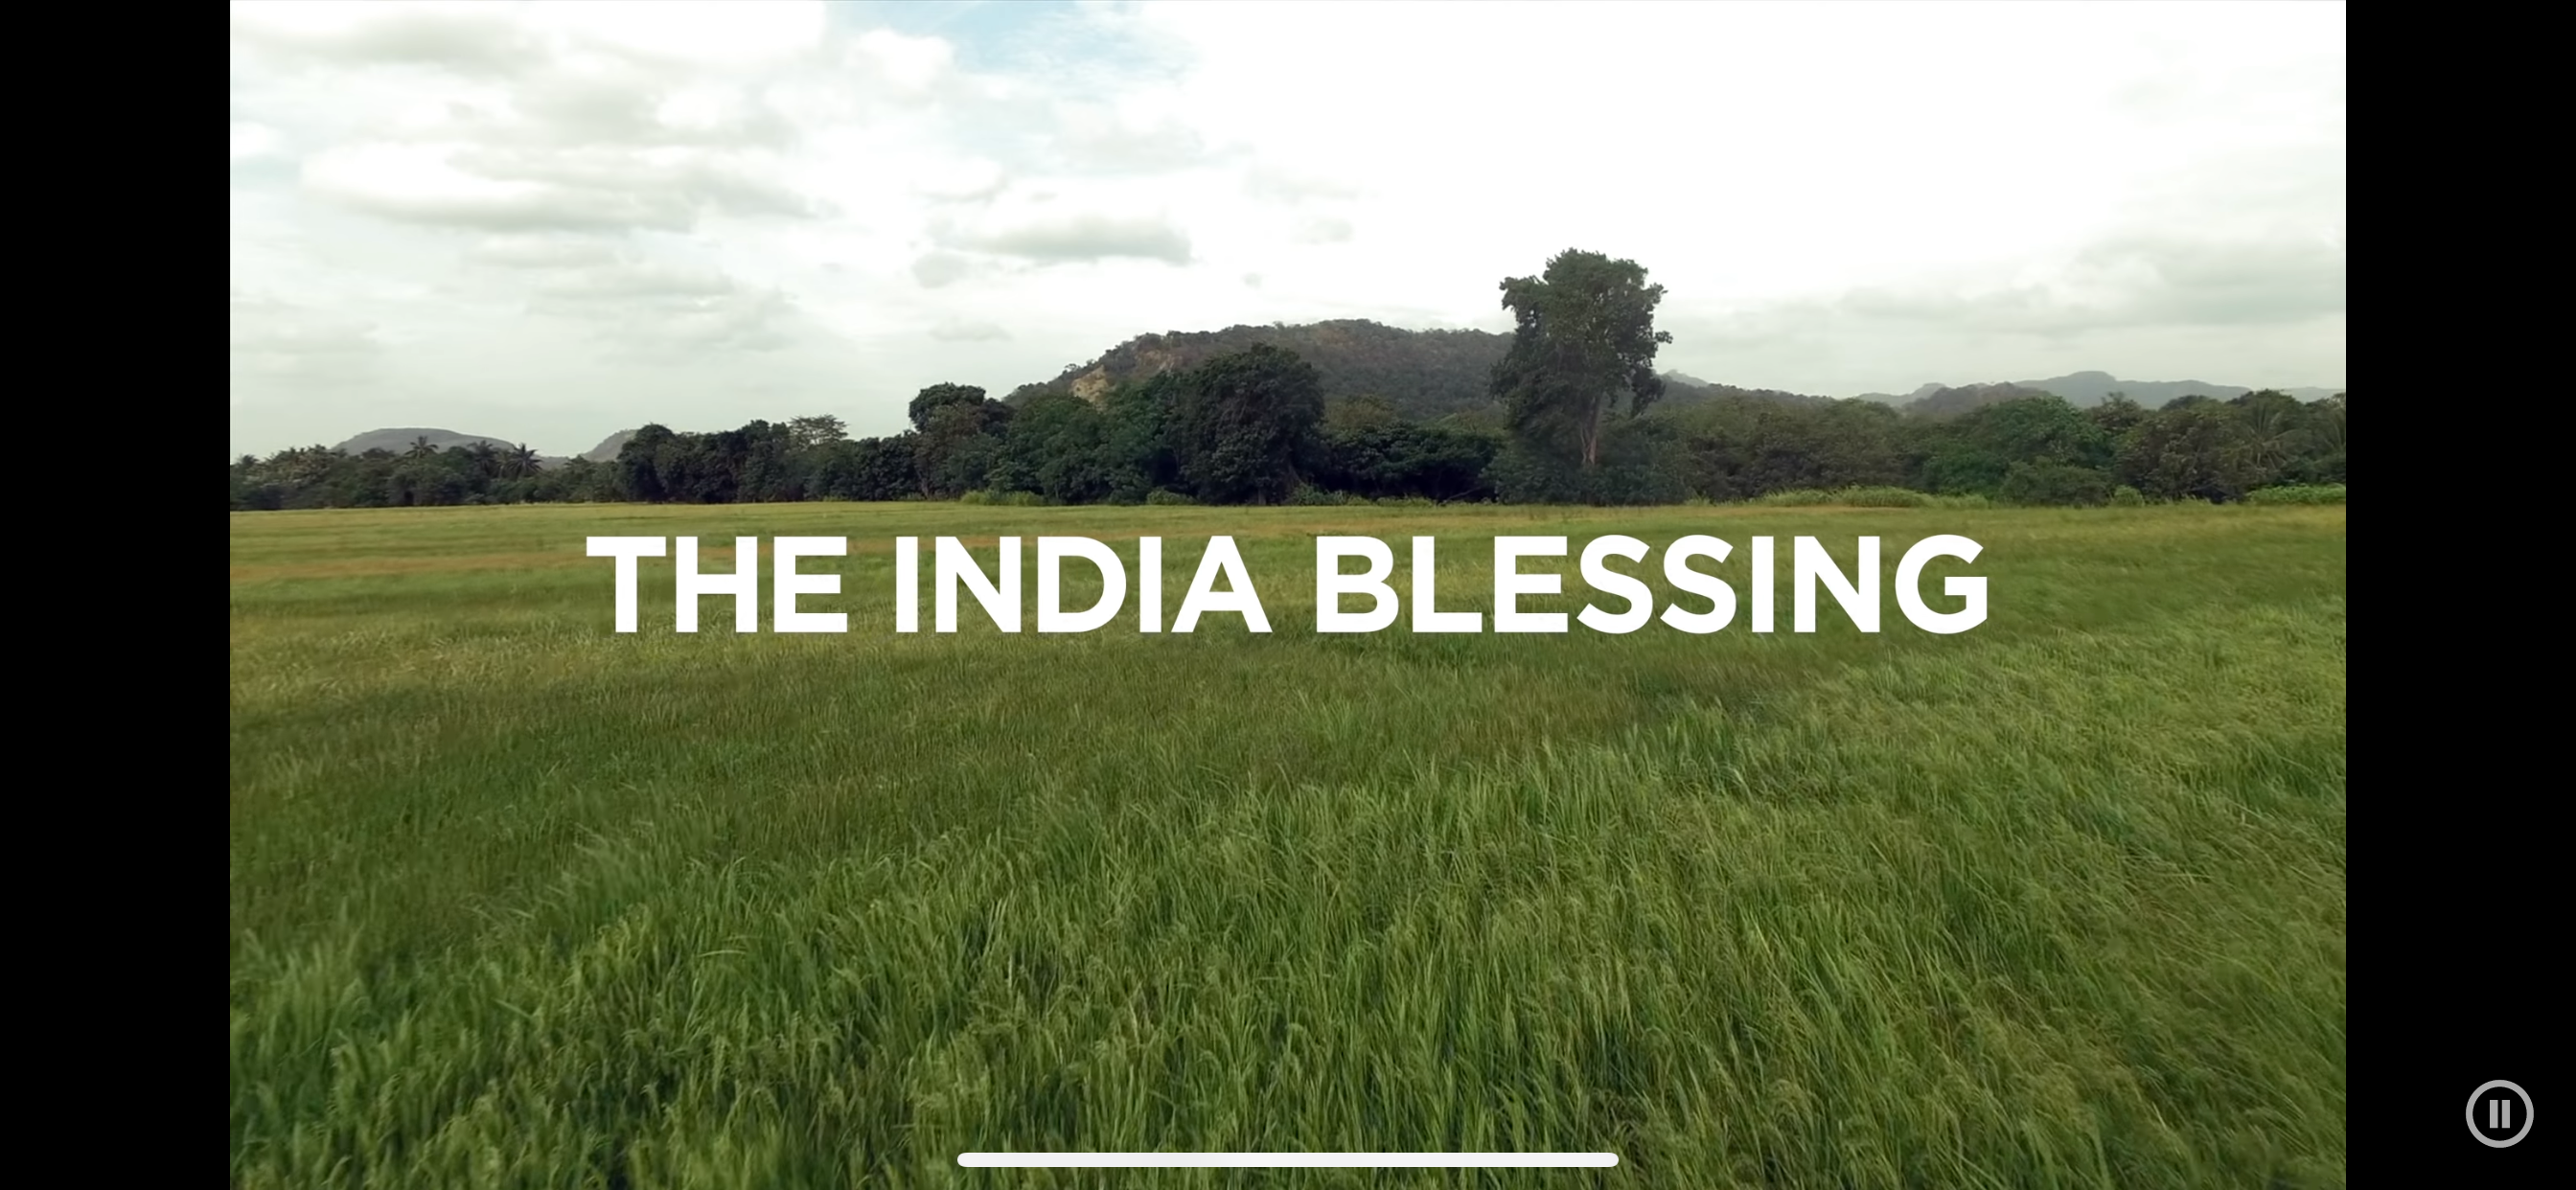 The India Blessing